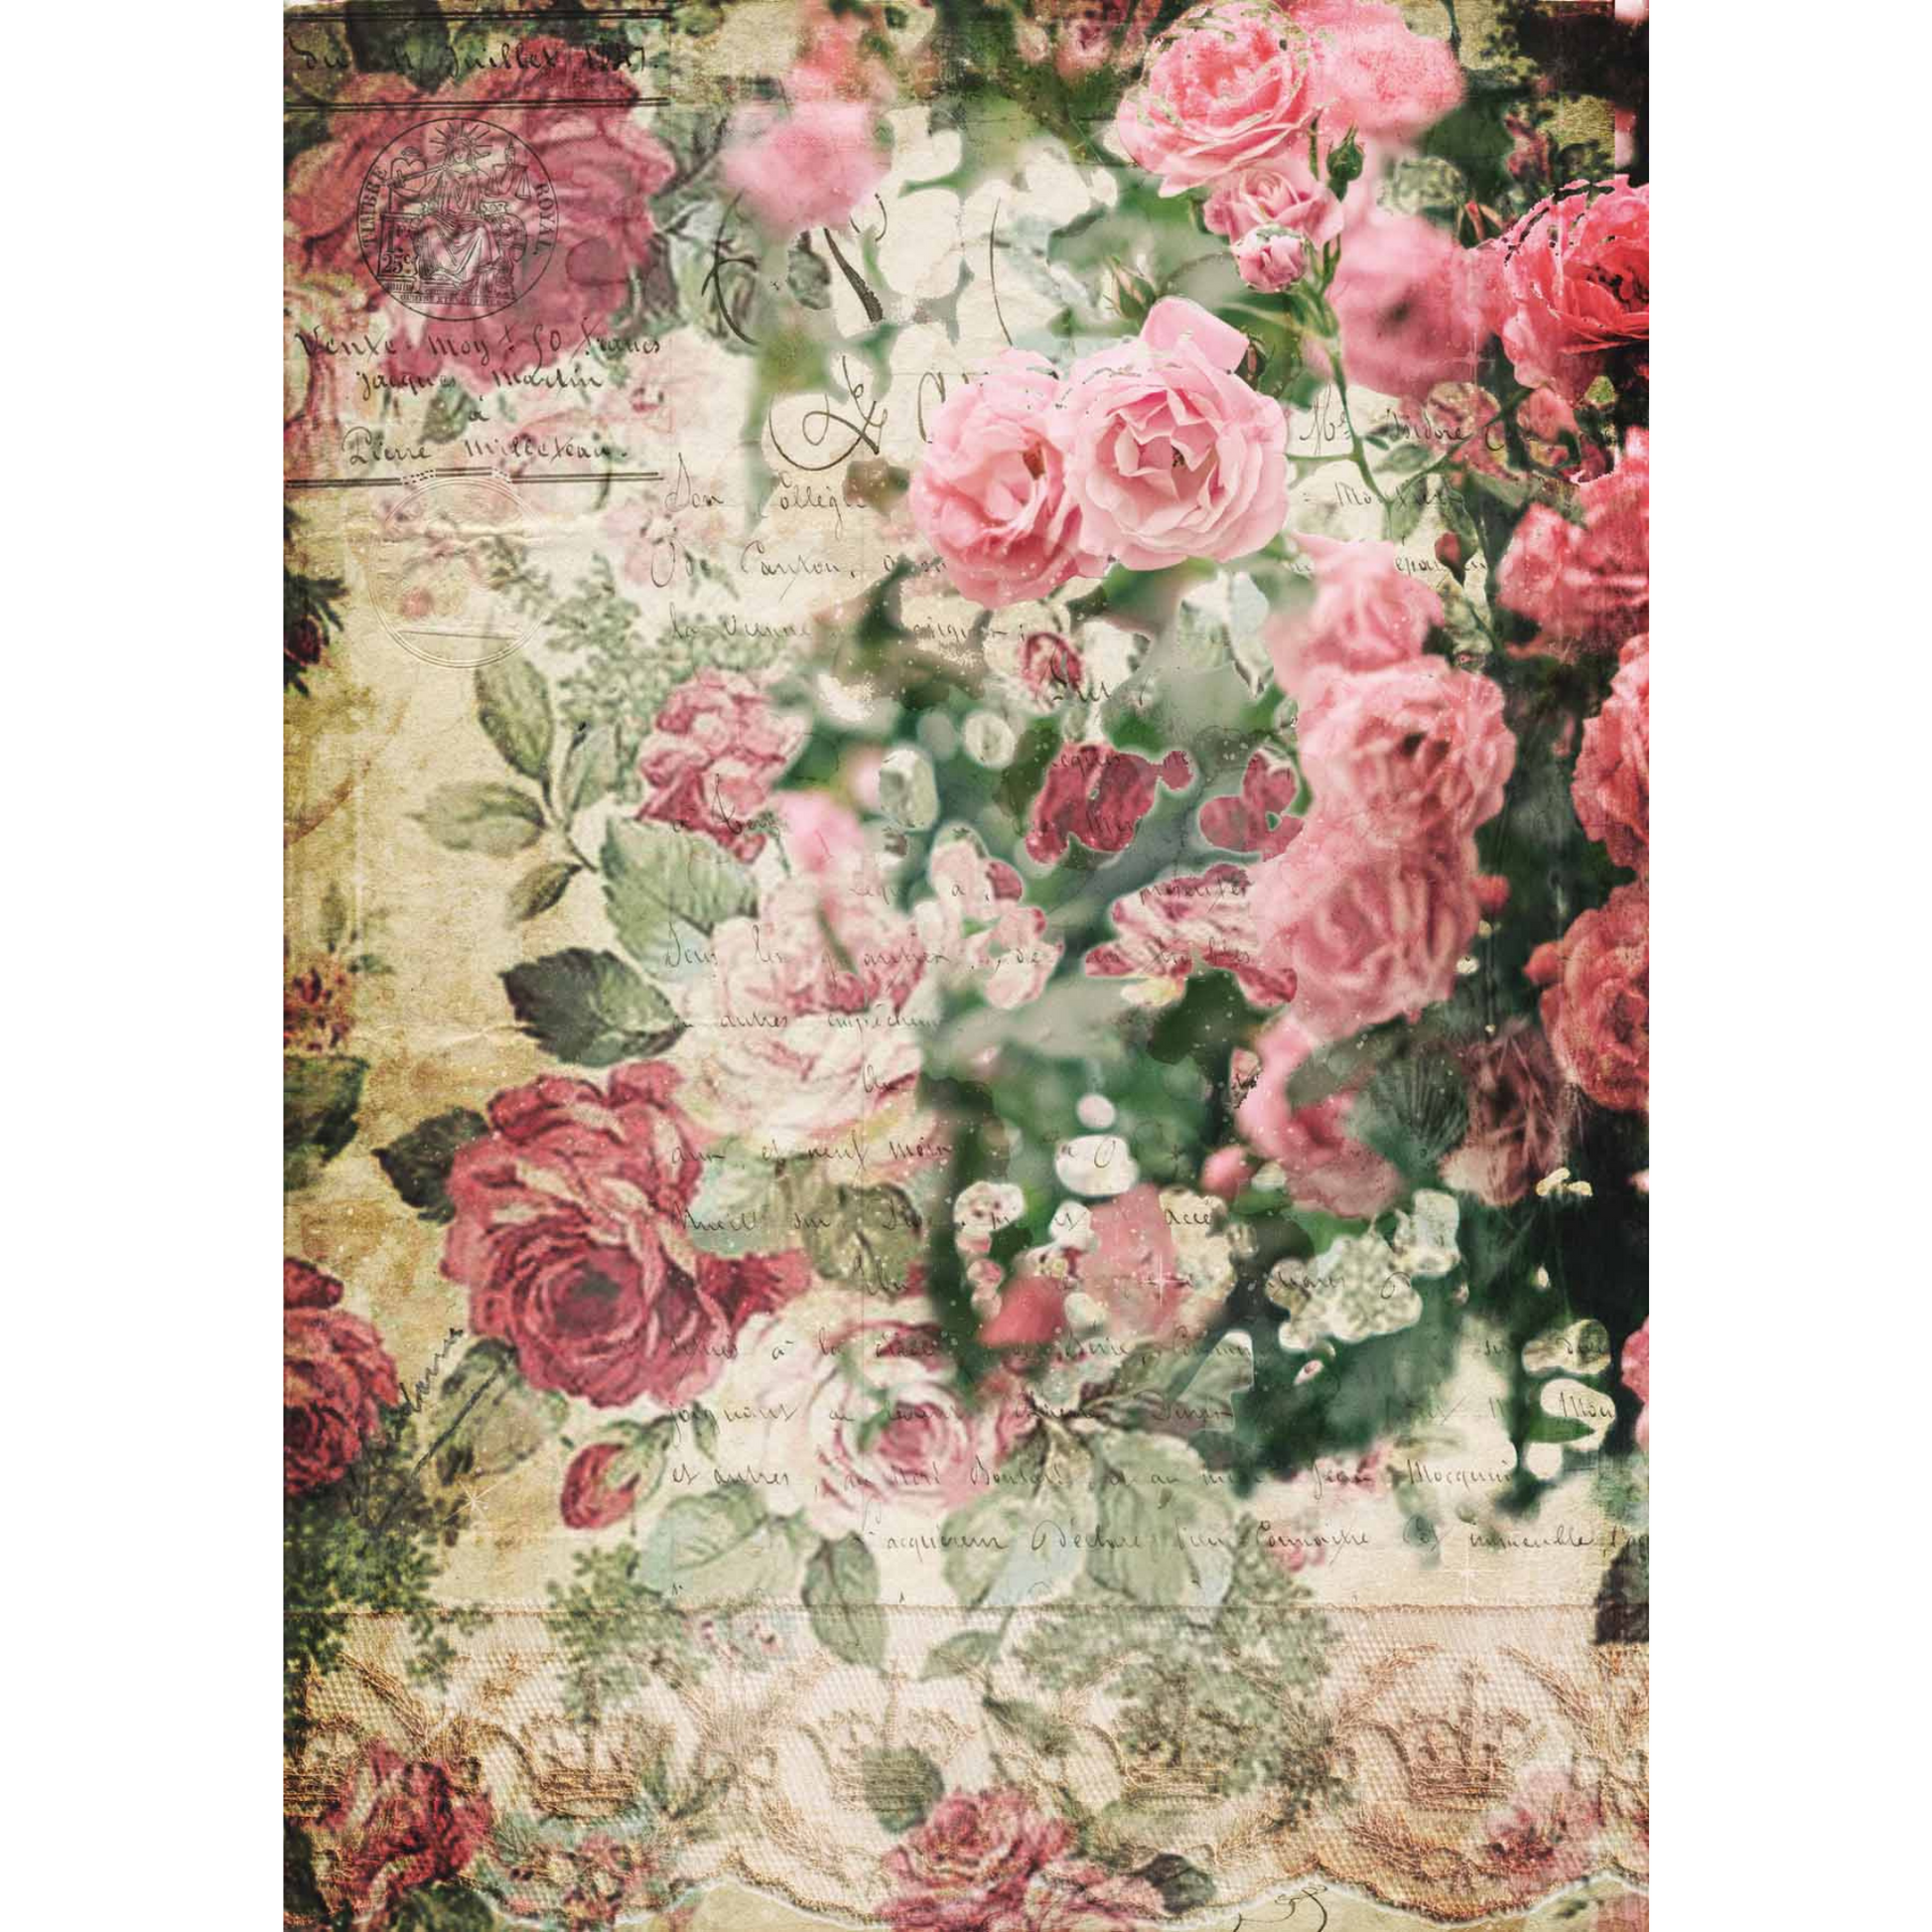 "Splash of Roses" Decoupage Rice Paper by Decoupage Queen in size A3 - 11'7" x 16.5" available at Milton's Daughter.